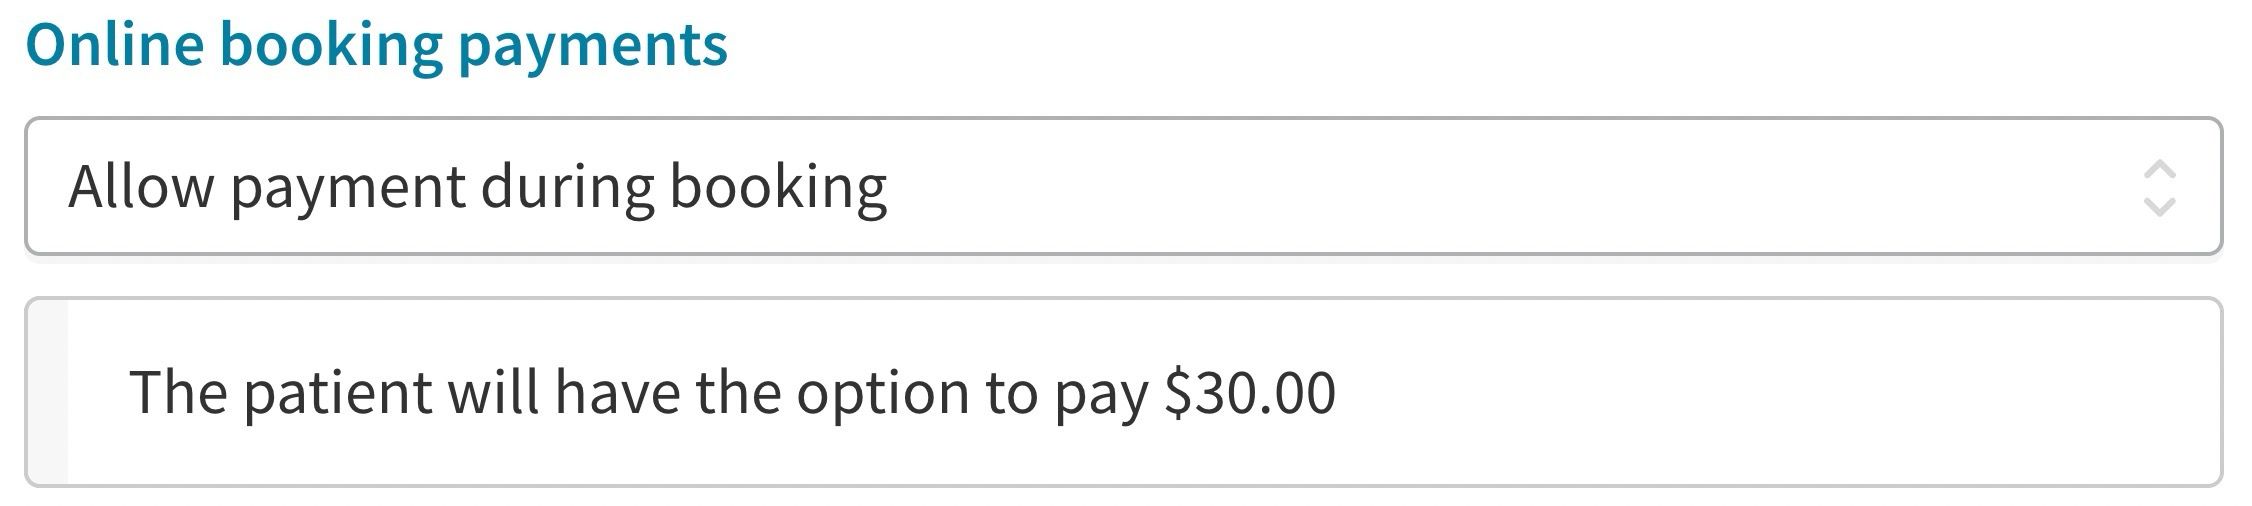 Screenshot of online booking payments setting. Allow payment during booking is selected. Text shows the patient will have the option to pay $30.00